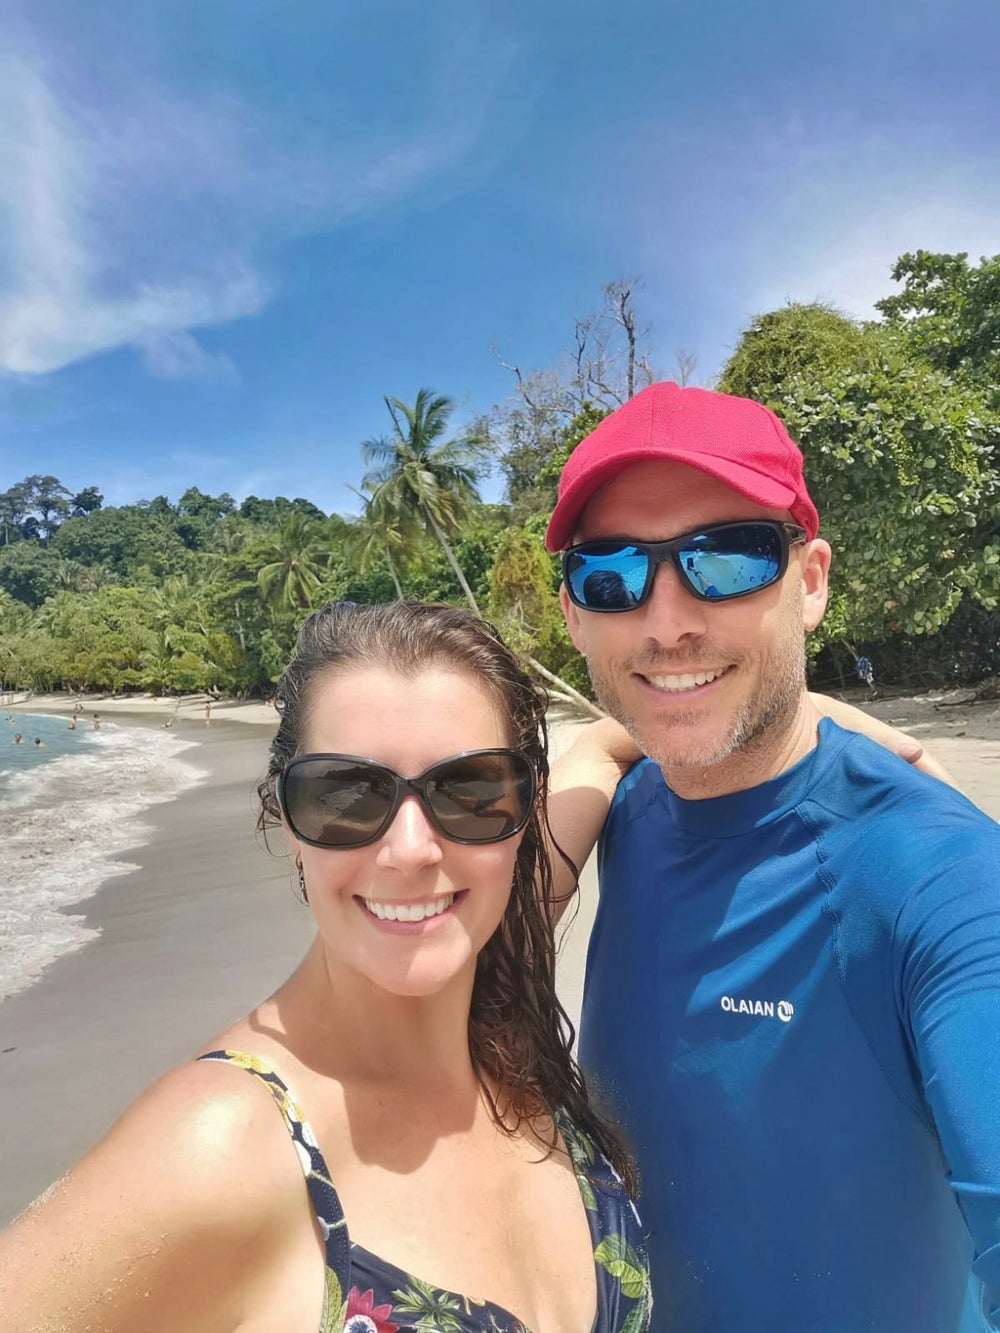 Terry and Jennifer in Costa Rica (PA Real Life/Collect)